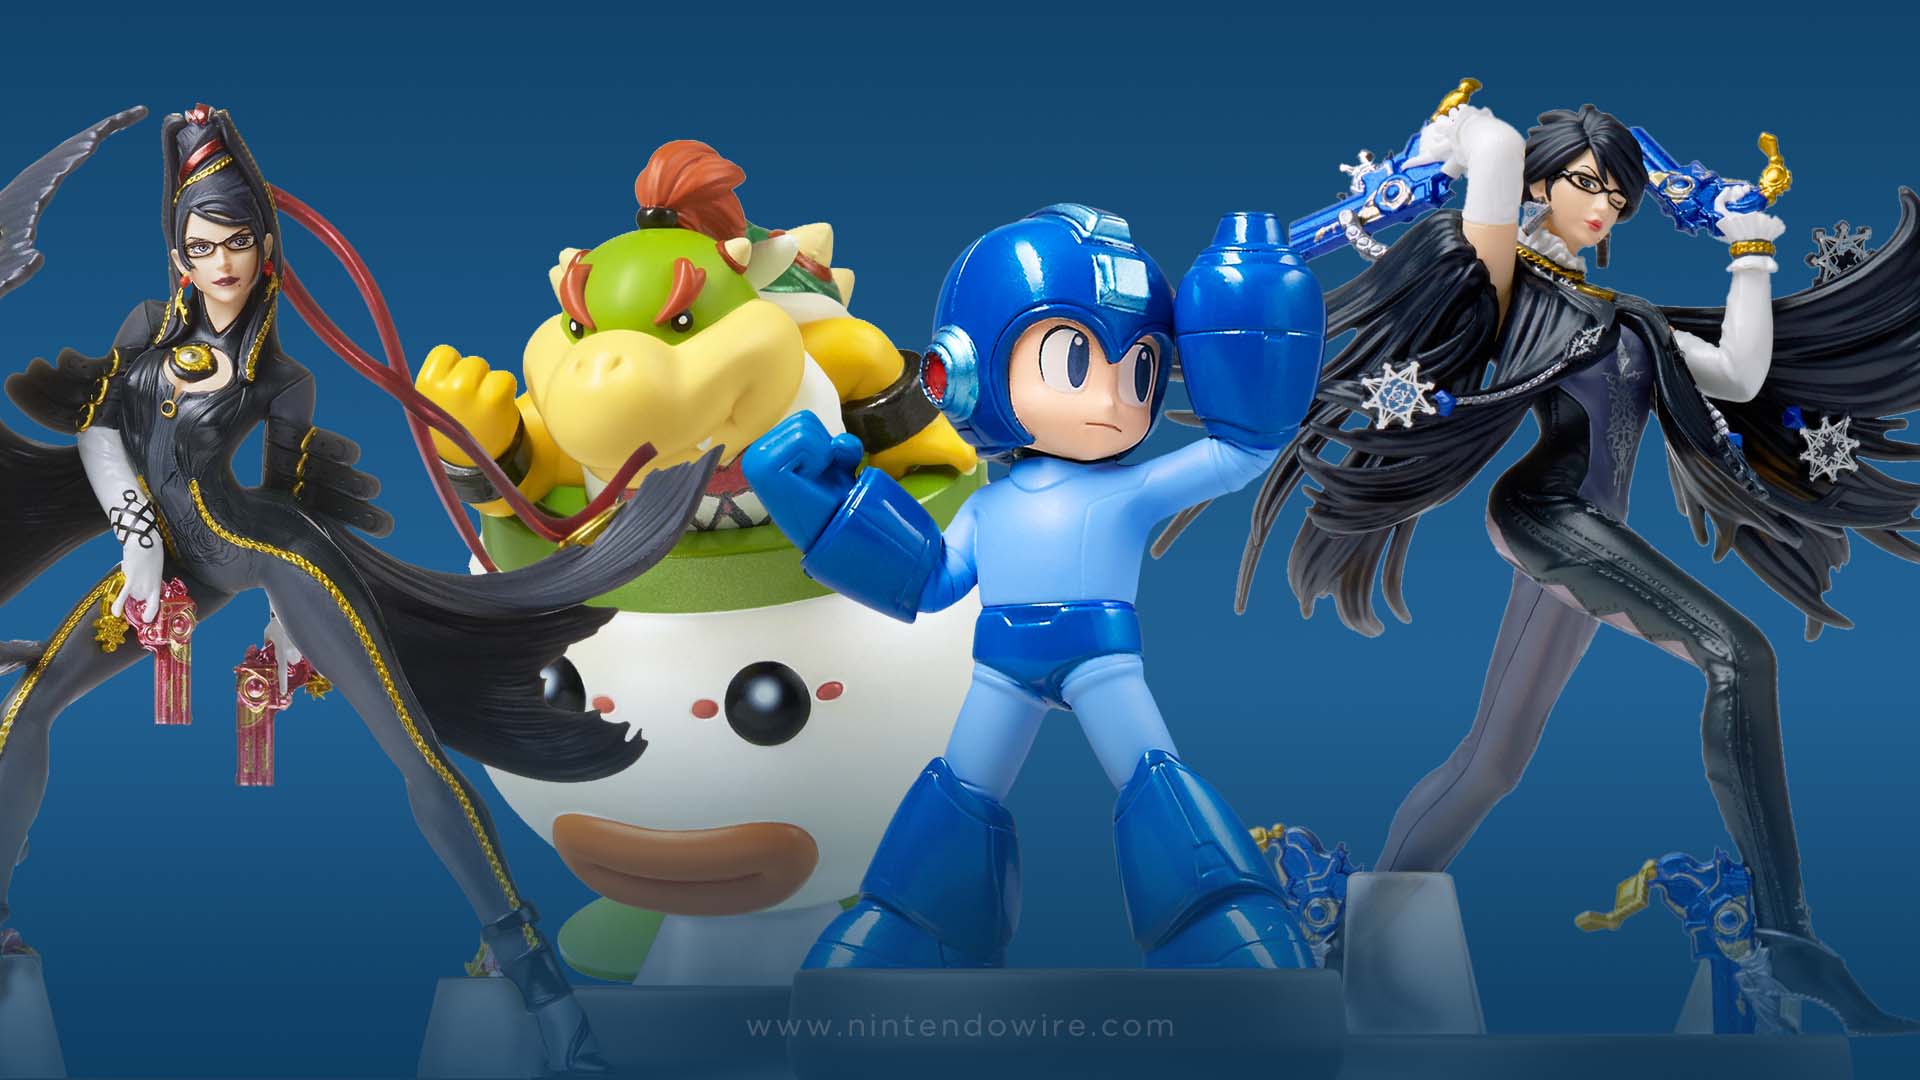 King Dedede, Bayonetta Player 2,and many more amiibo receiving re-releases  - Nintendo Wire